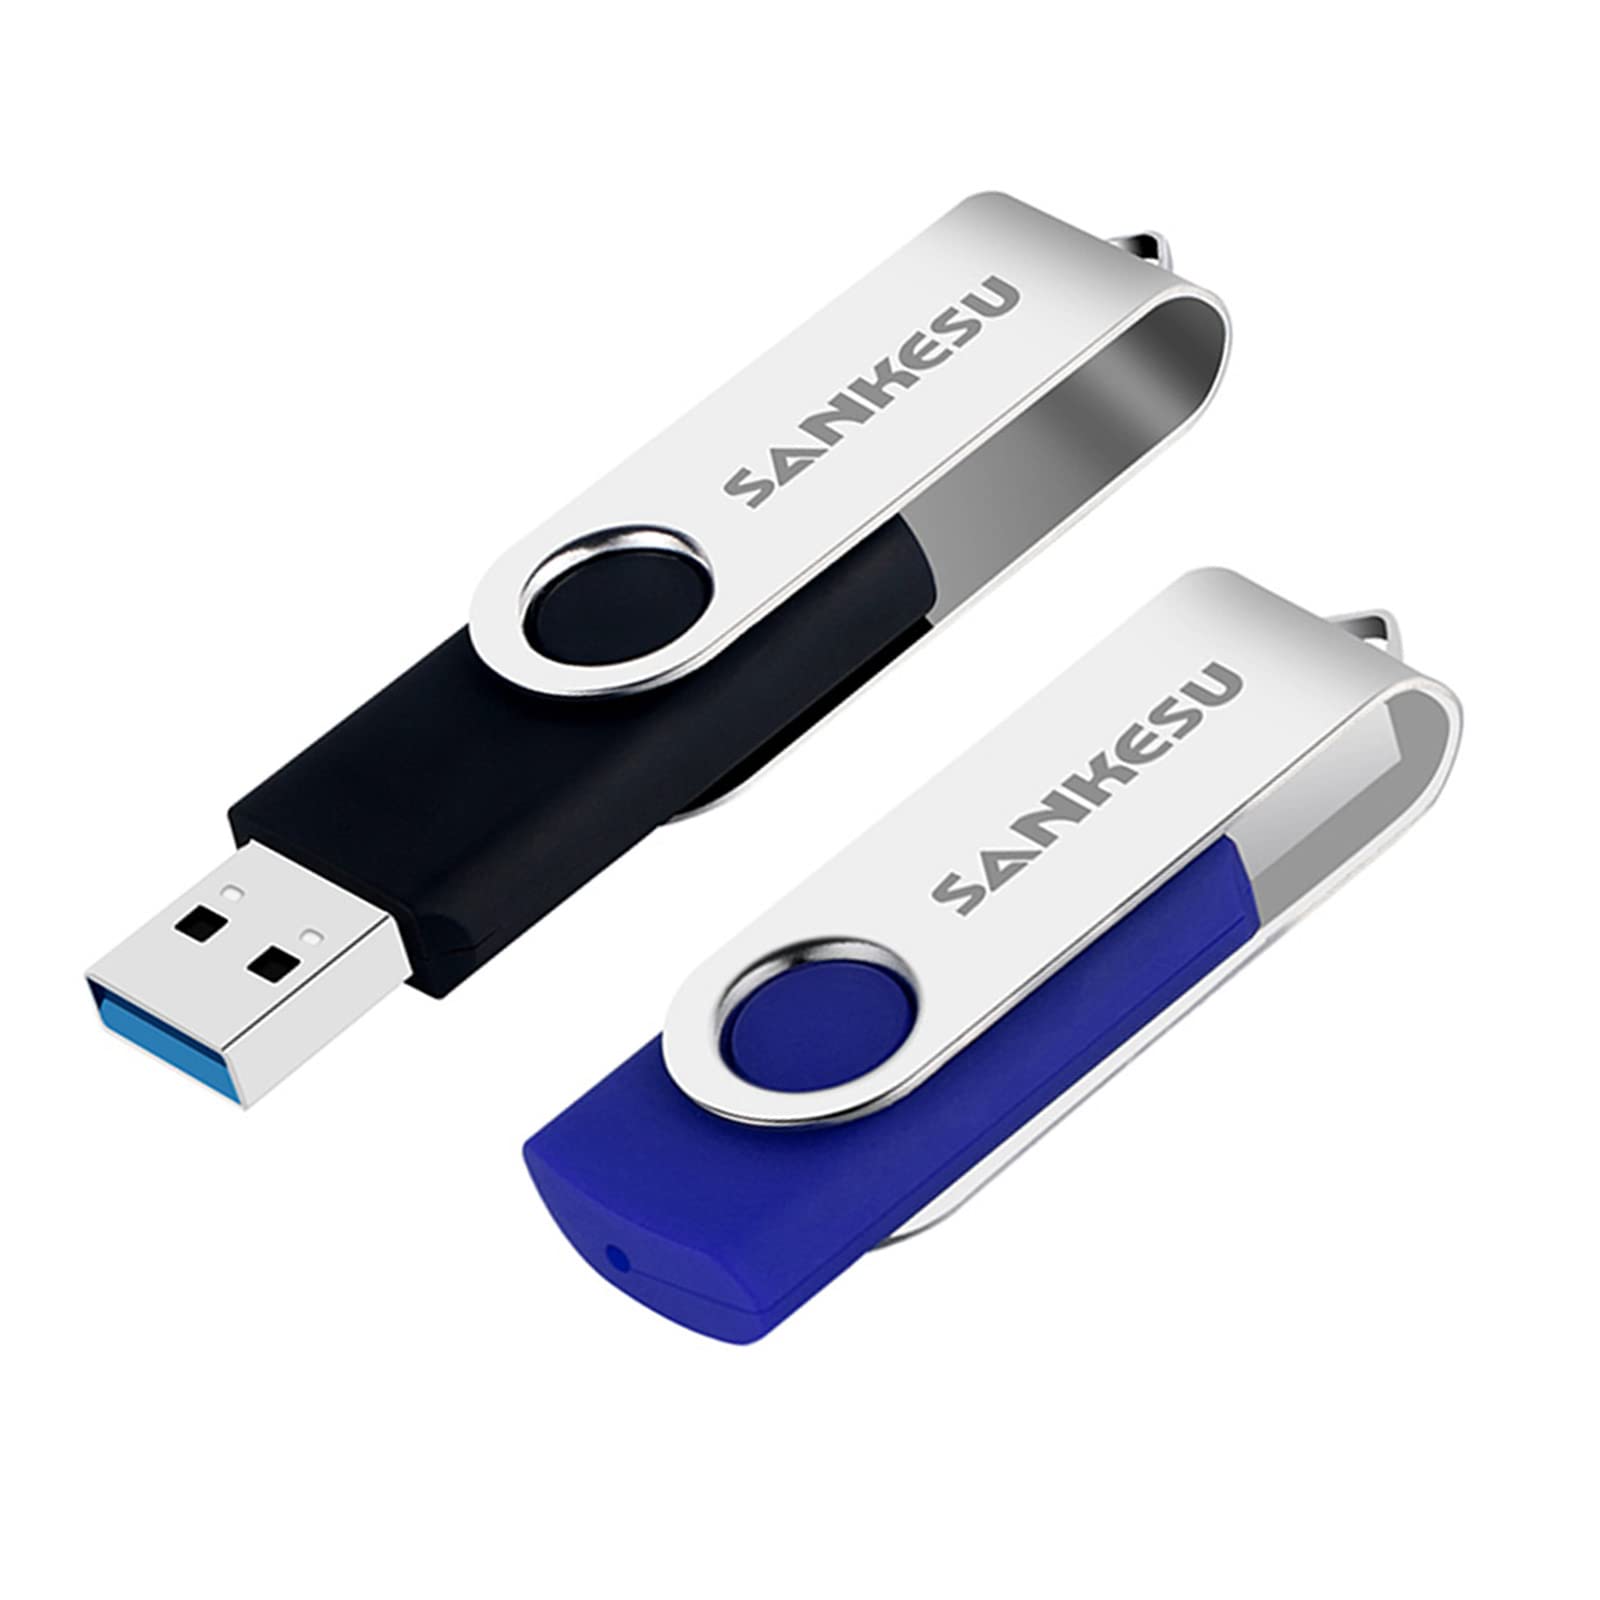 SANKESU 32GB USB 3.0 Flash Drives 2 Pack Thumb Drive Rotating Design High Speed USB Memory Stick Jump Drive with LED Light Data Storage for PC/Laptop/Car/TV and More (2 Colors: Black Blue)